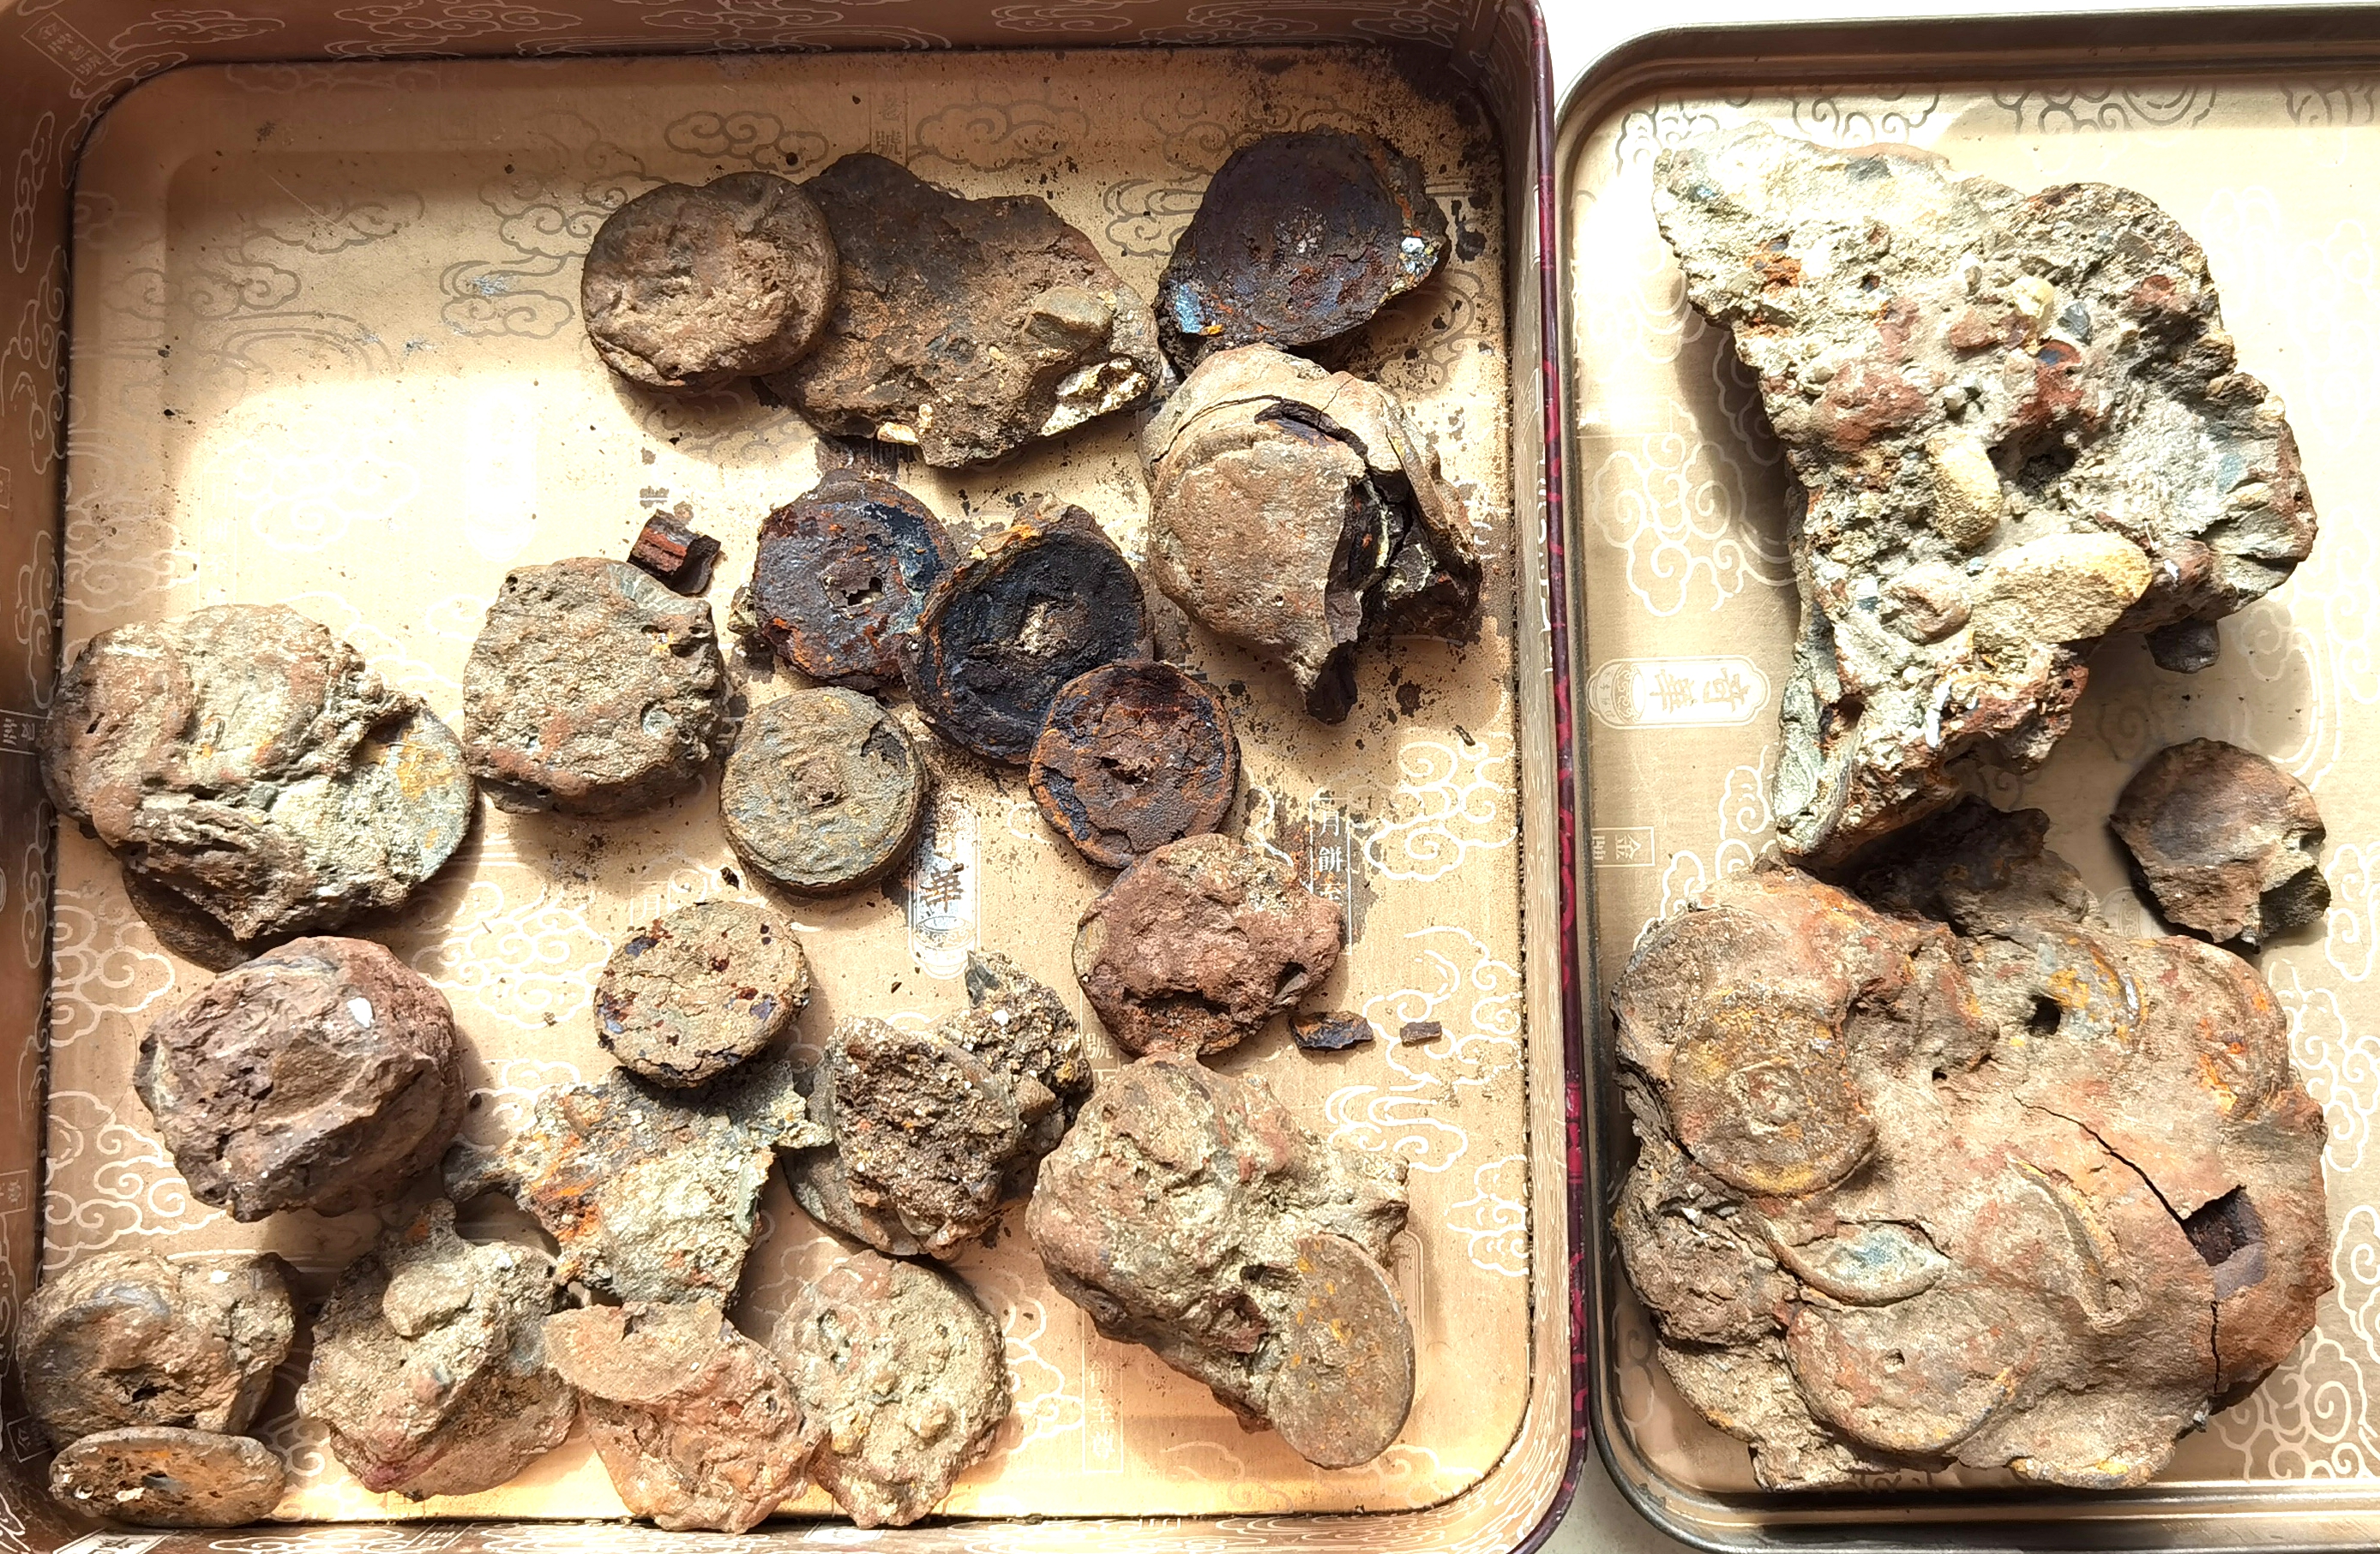 K7230, China 0.25 Kilogram Uncleaned Iron Coins in Clumps, AD 1200